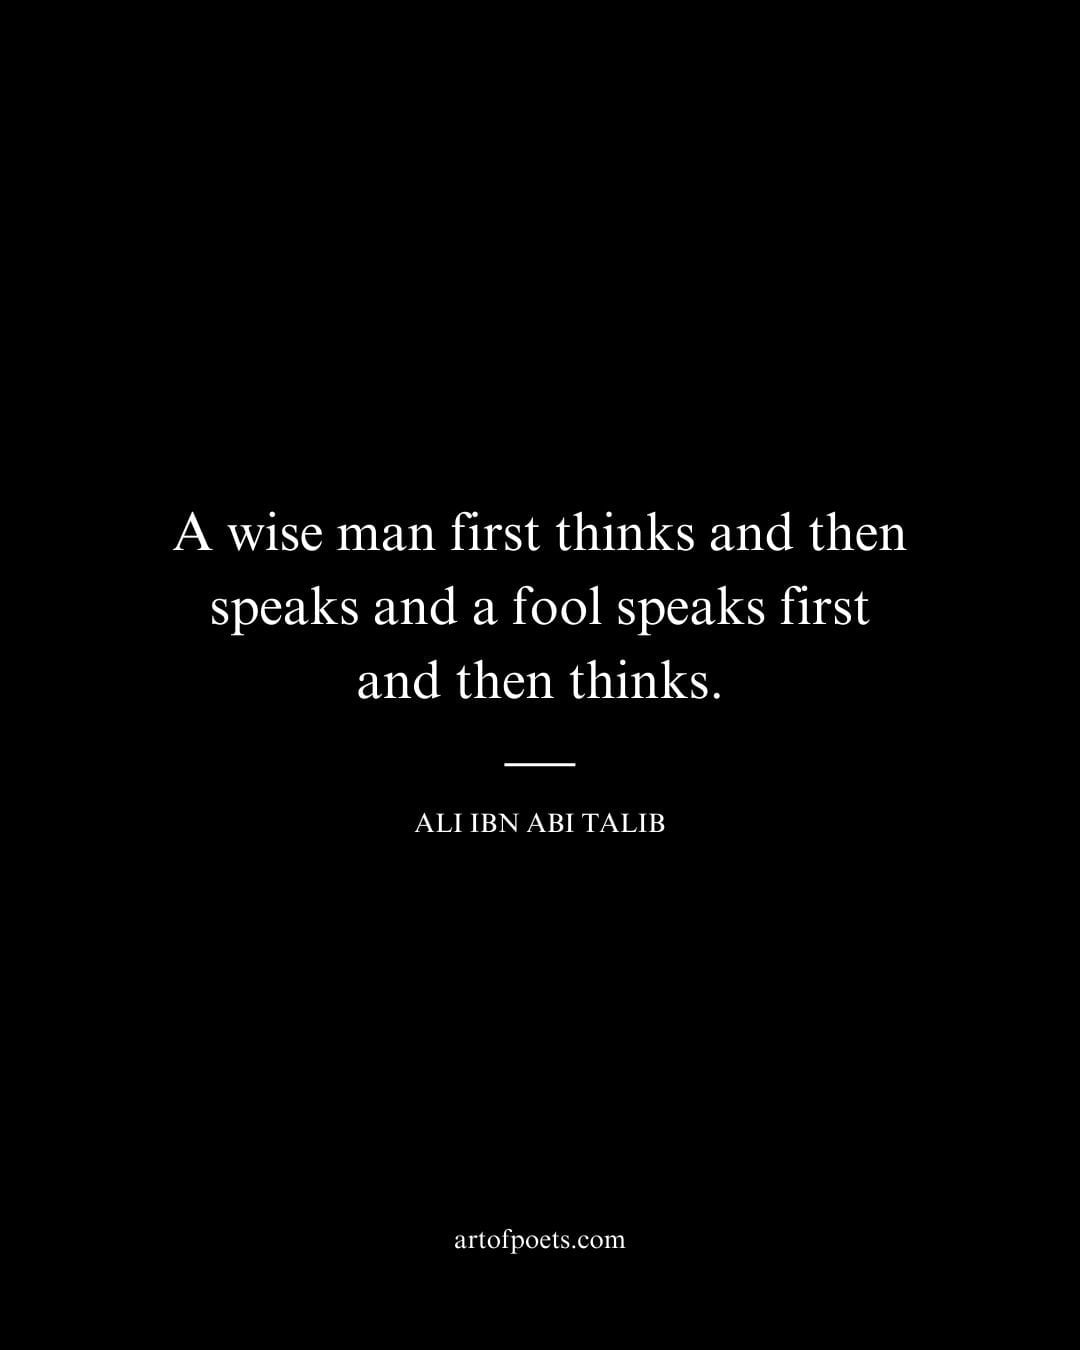 A wise man first thinks and then speaks and a fool speaks first and then thinks